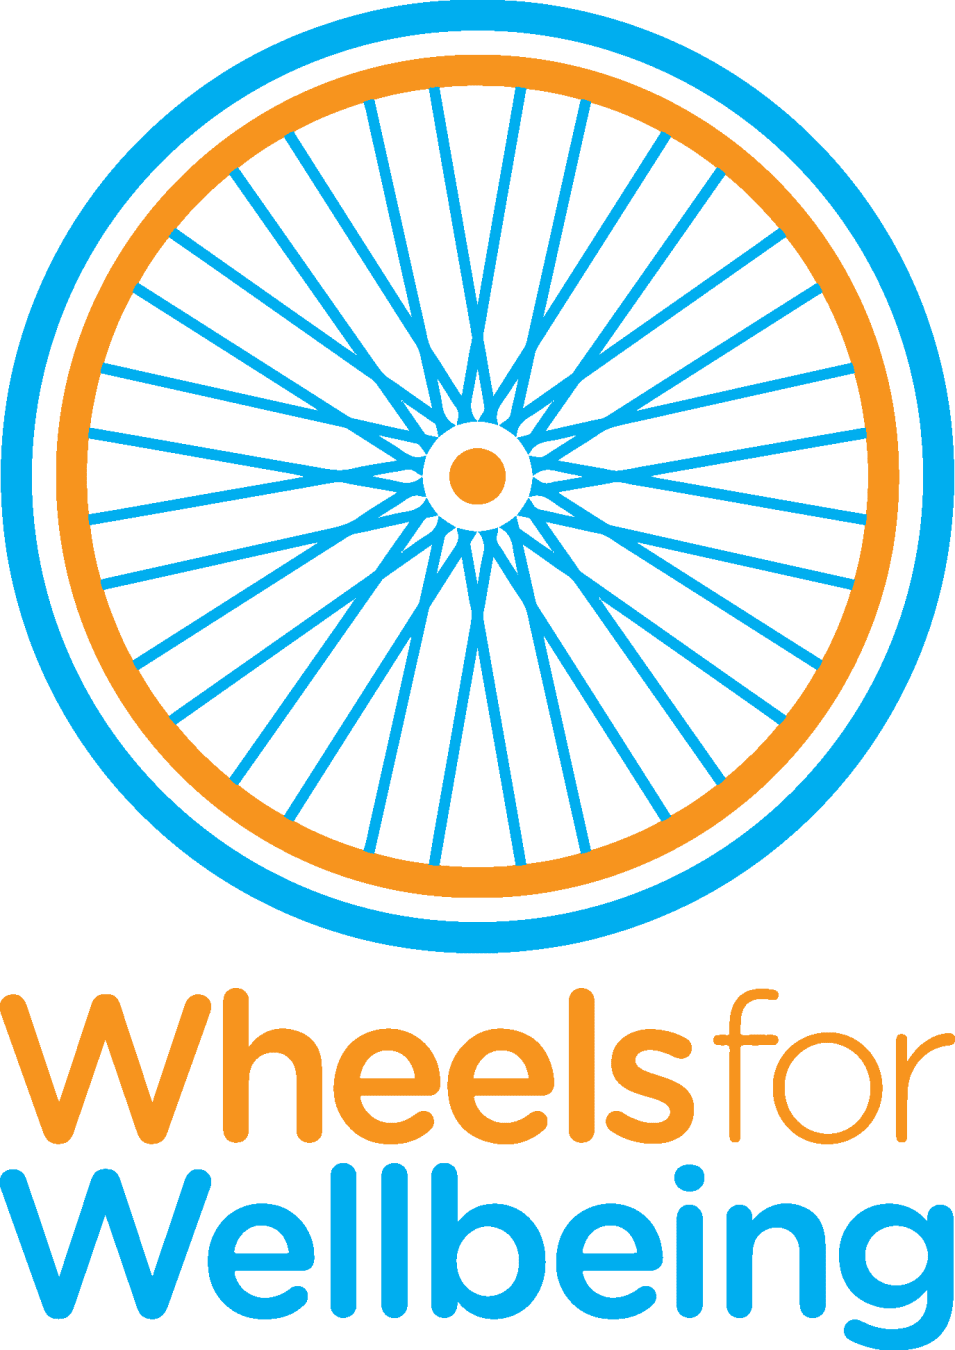 Wheels for Wellbeing's logo